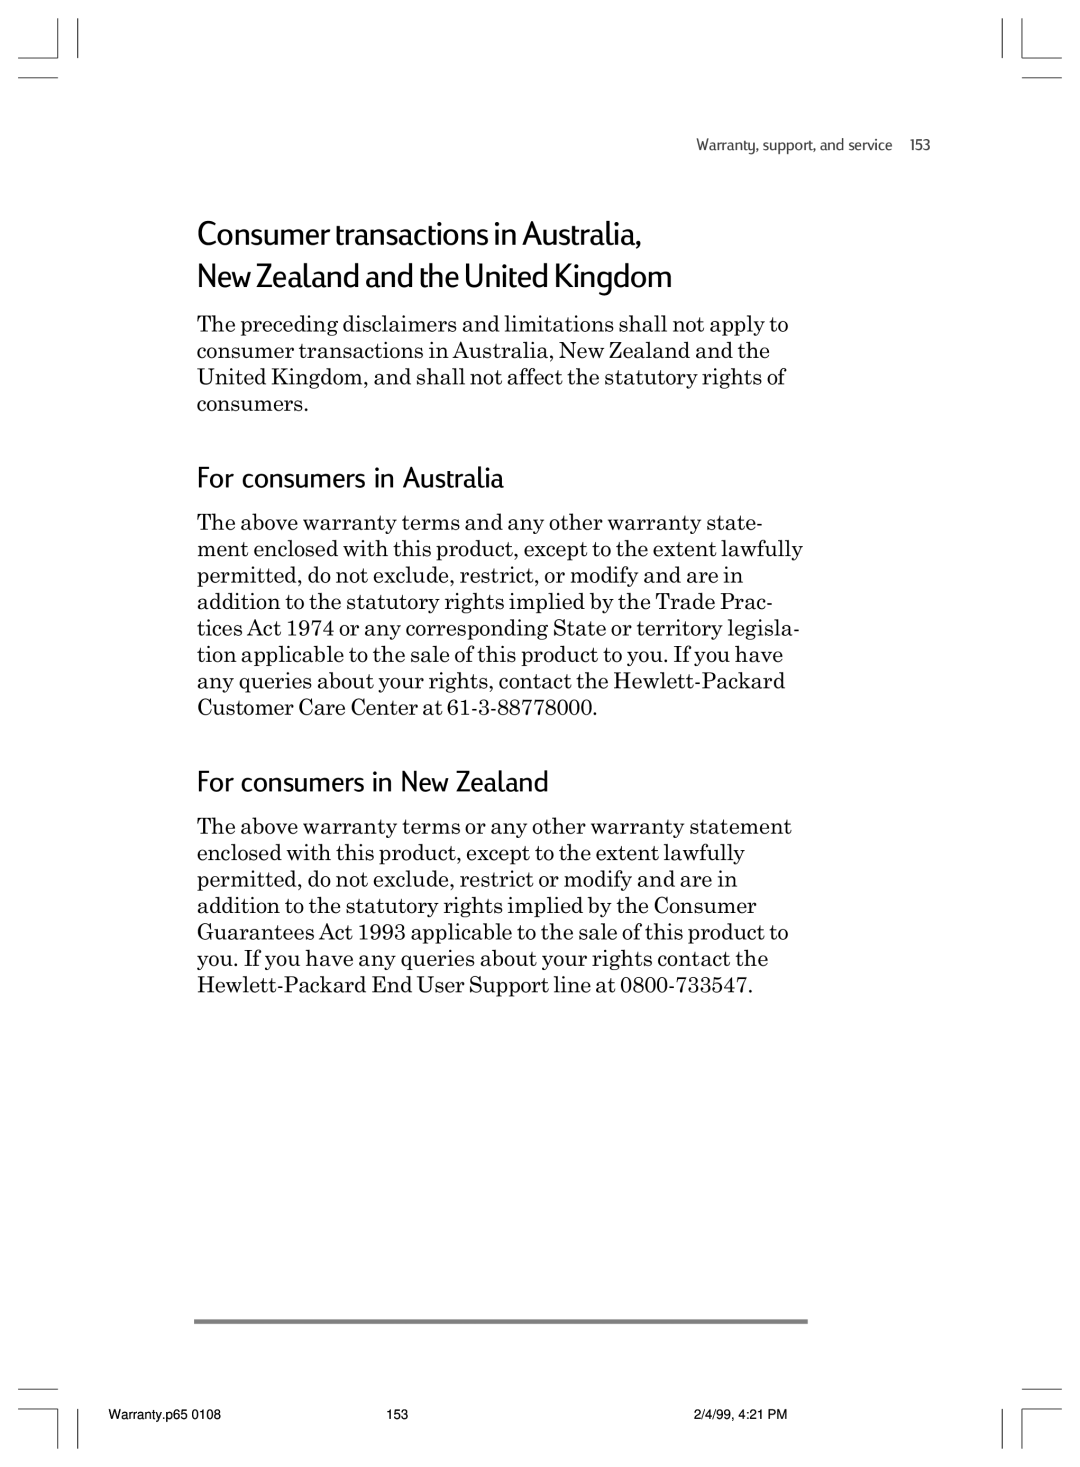 HP 820 E manual Consumer transactions in Australia New Zealand and the United Kingdom, For consumers in Australia 